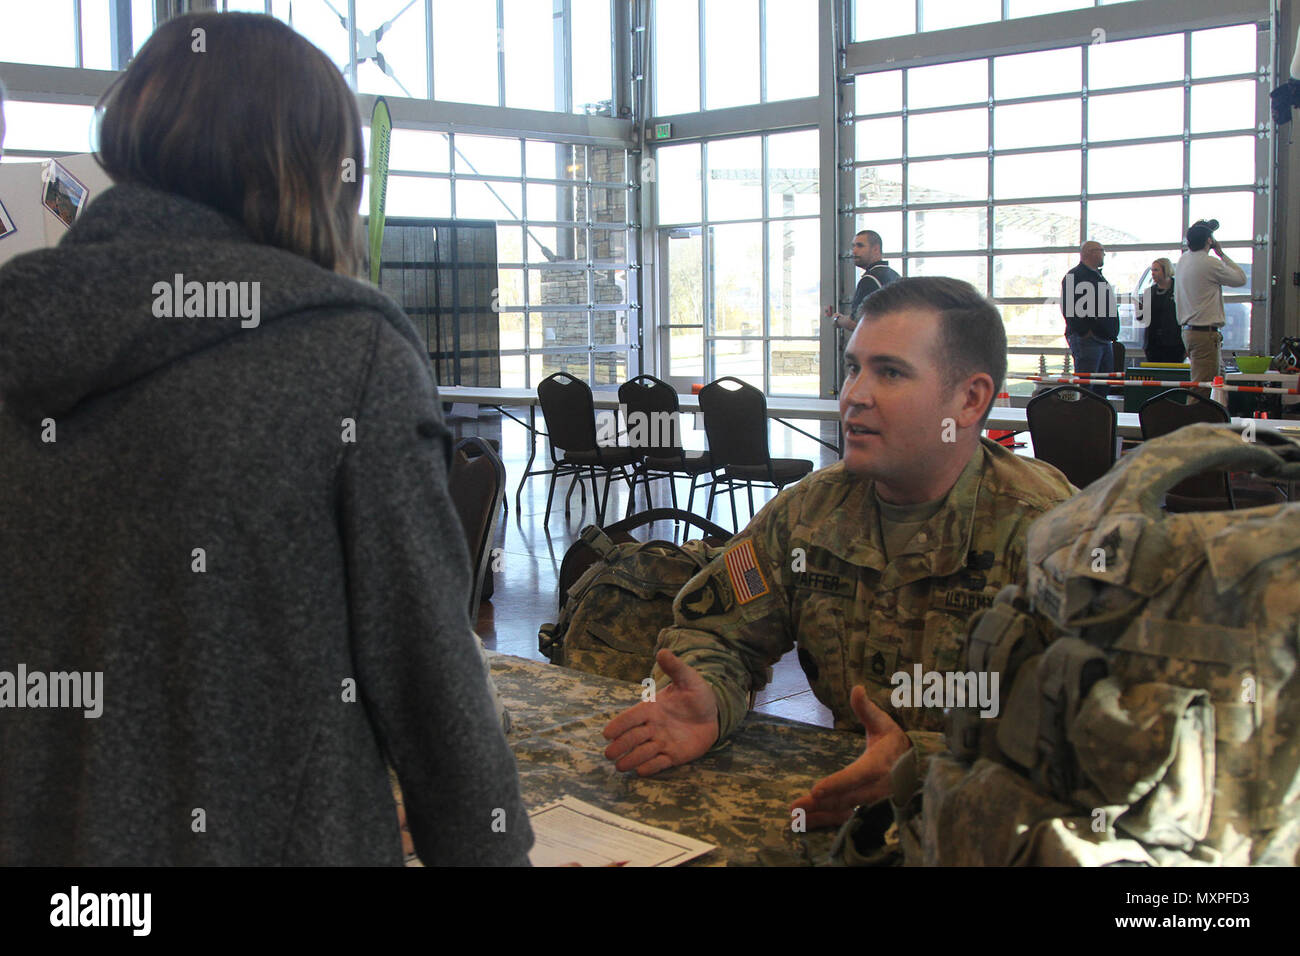 Sgt. 1st Class Shannon Shaffer, a combat engineer with 101st Airborne Division (Air Assault) Sustainment Brigade, 101st Abn. Div., speaks to a student, Nov. 16, 2016, during the Eighth-Grade Career Exploration Day hosted by the Clarksville-Montgomery County School System at the Wilma Rudolph Event Center in Clarksville, Tn. (U.S. Army photo by Sgt. Neysa Canfield/101st Airborne Division Sustainment Brigade Public Affairs) Stock Photo